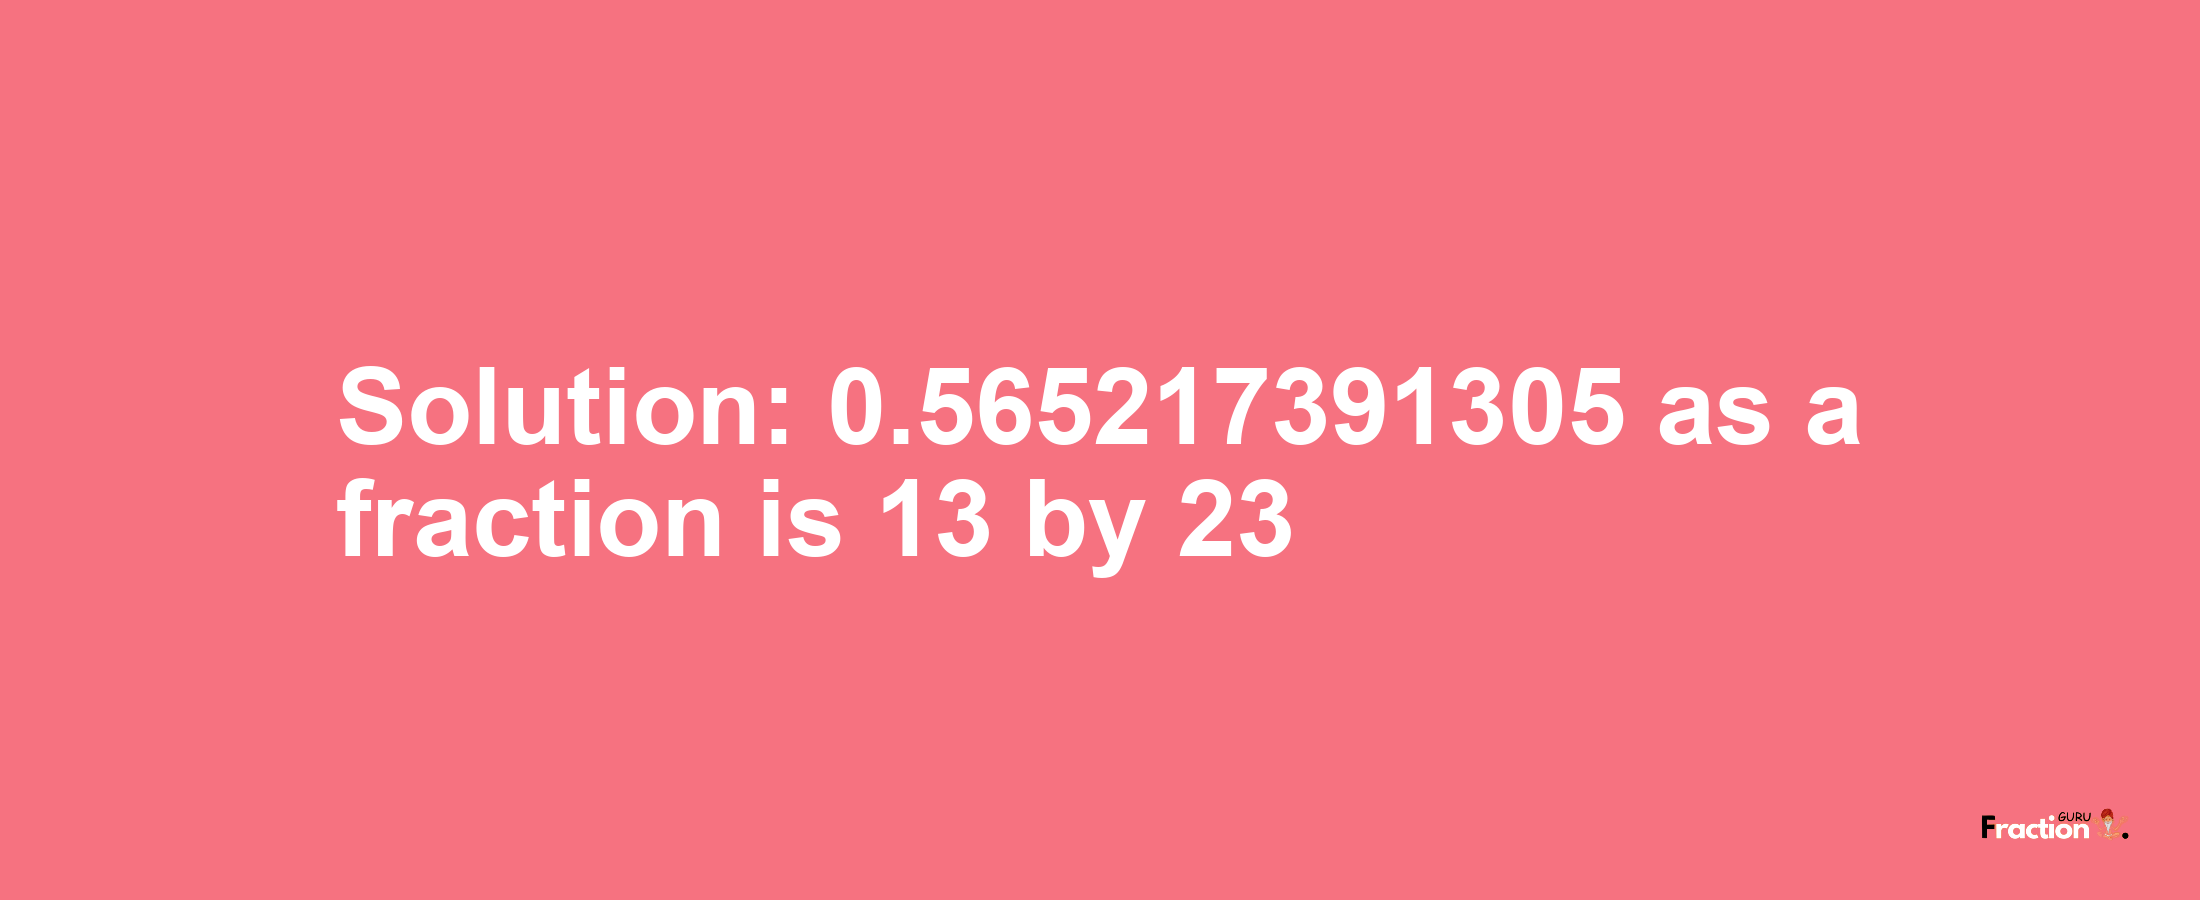 Solution:0.565217391305 as a fraction is 13/23